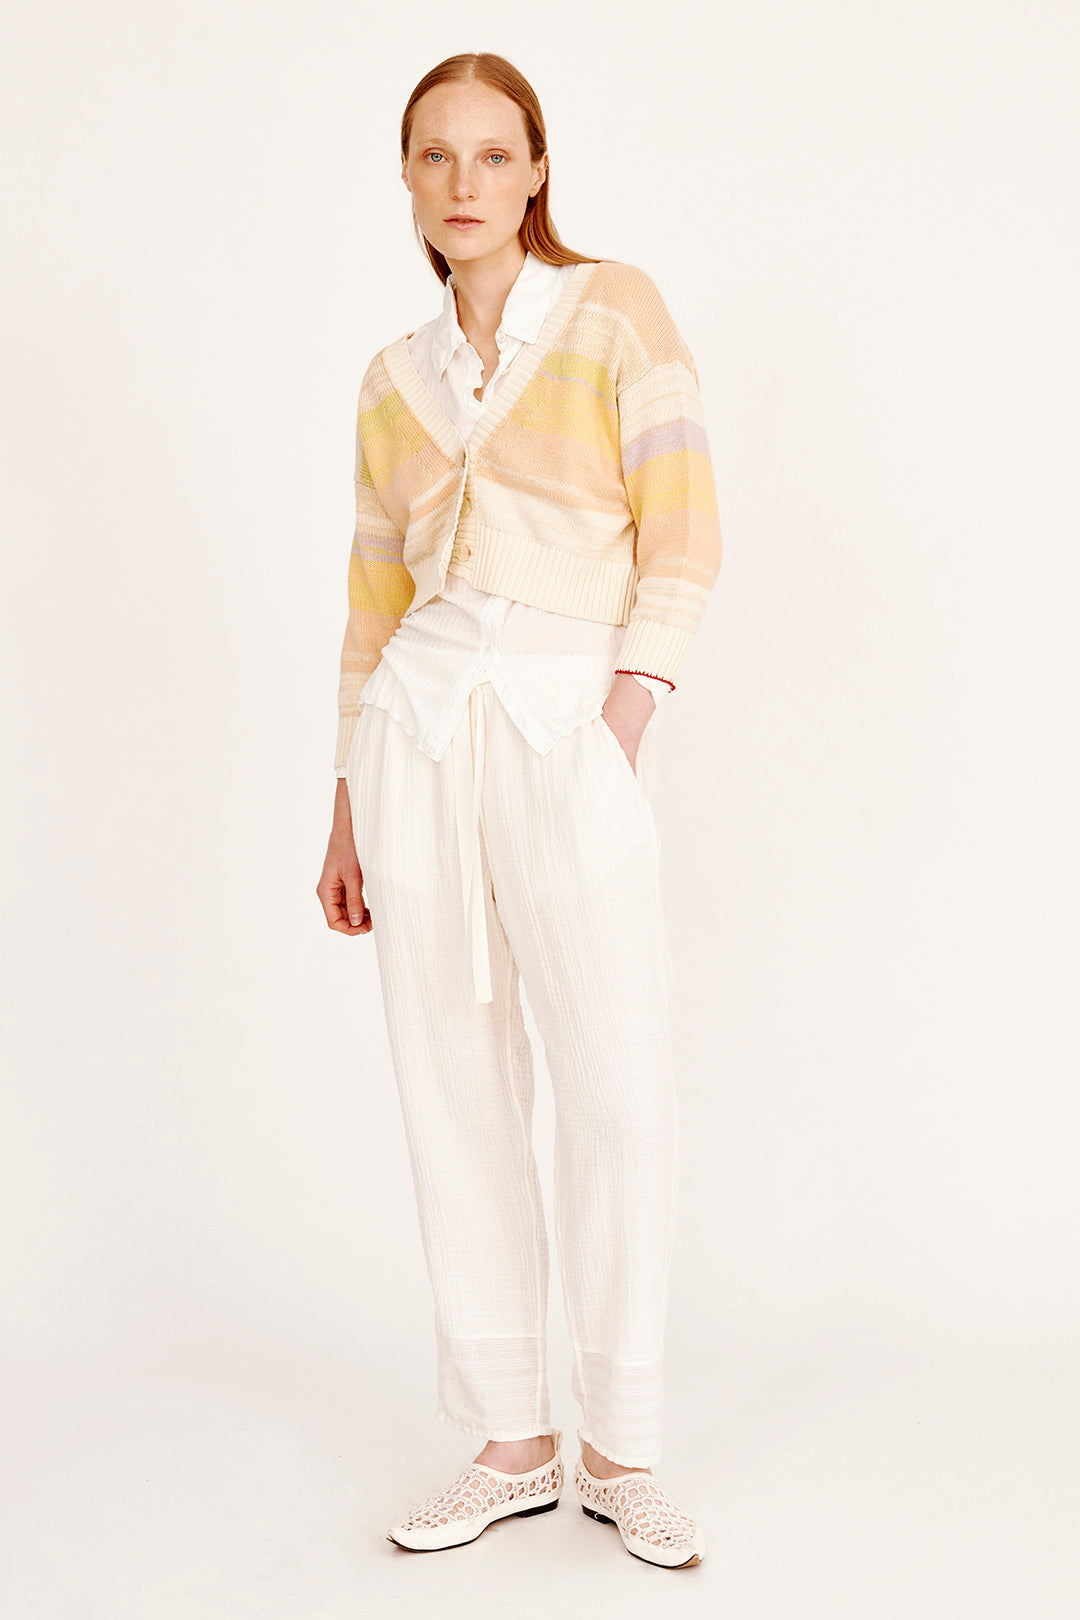 Cotton Cashmere Yellows Gower Cardigan RA-SWEATER PREFALL'24   